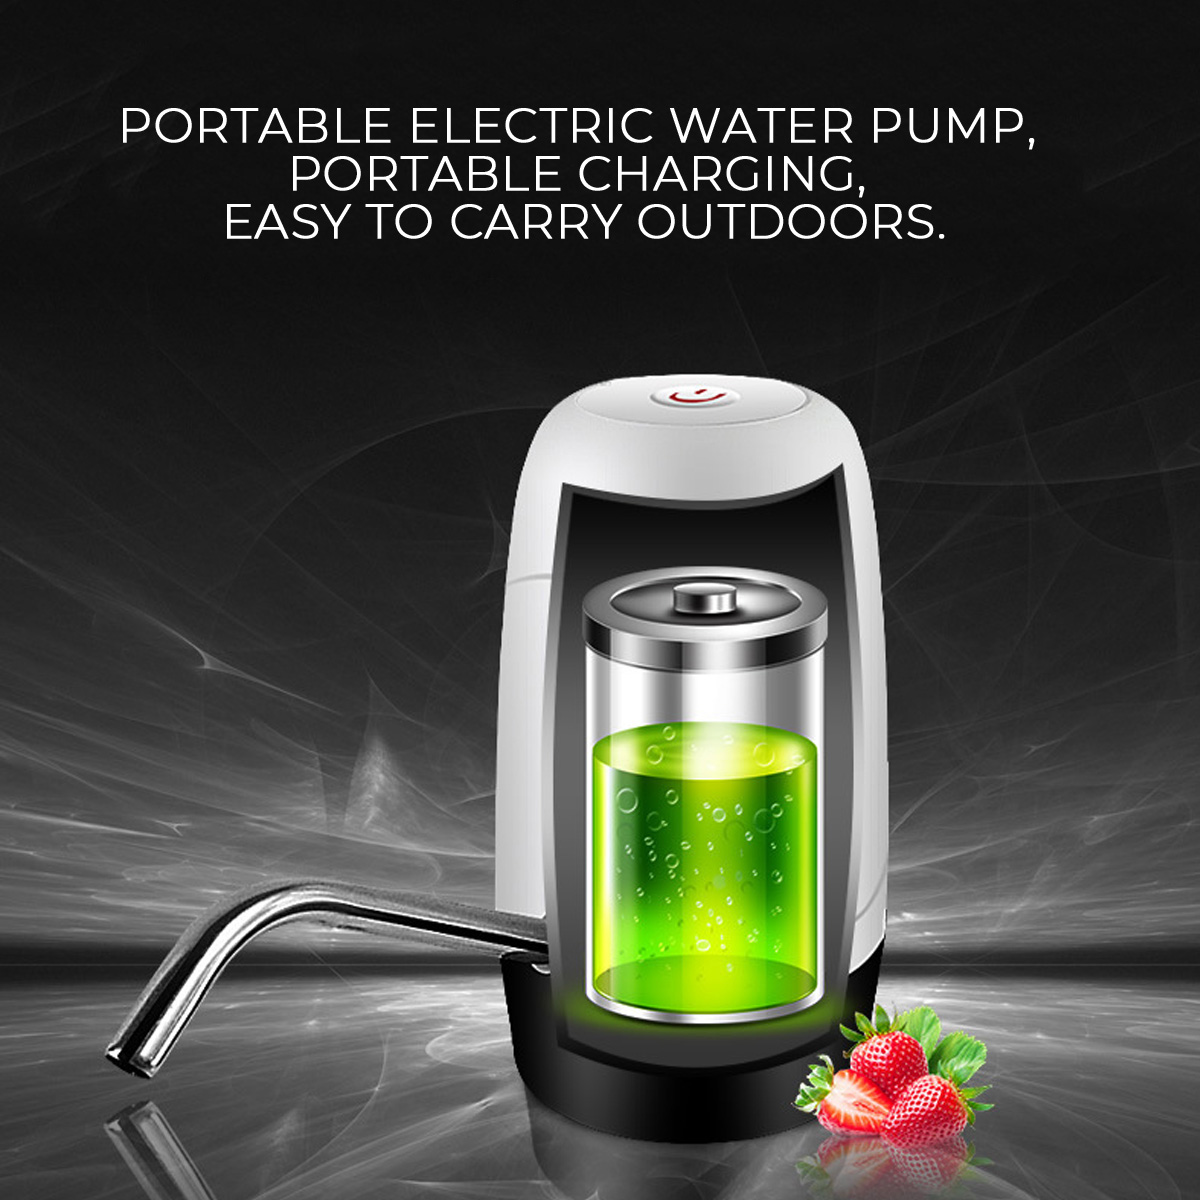 37V-USB-Rechargeable-Automatic-Electric-Water-Pump-Dispenser-Drinking-Bottle-Outdoor-1568197-6